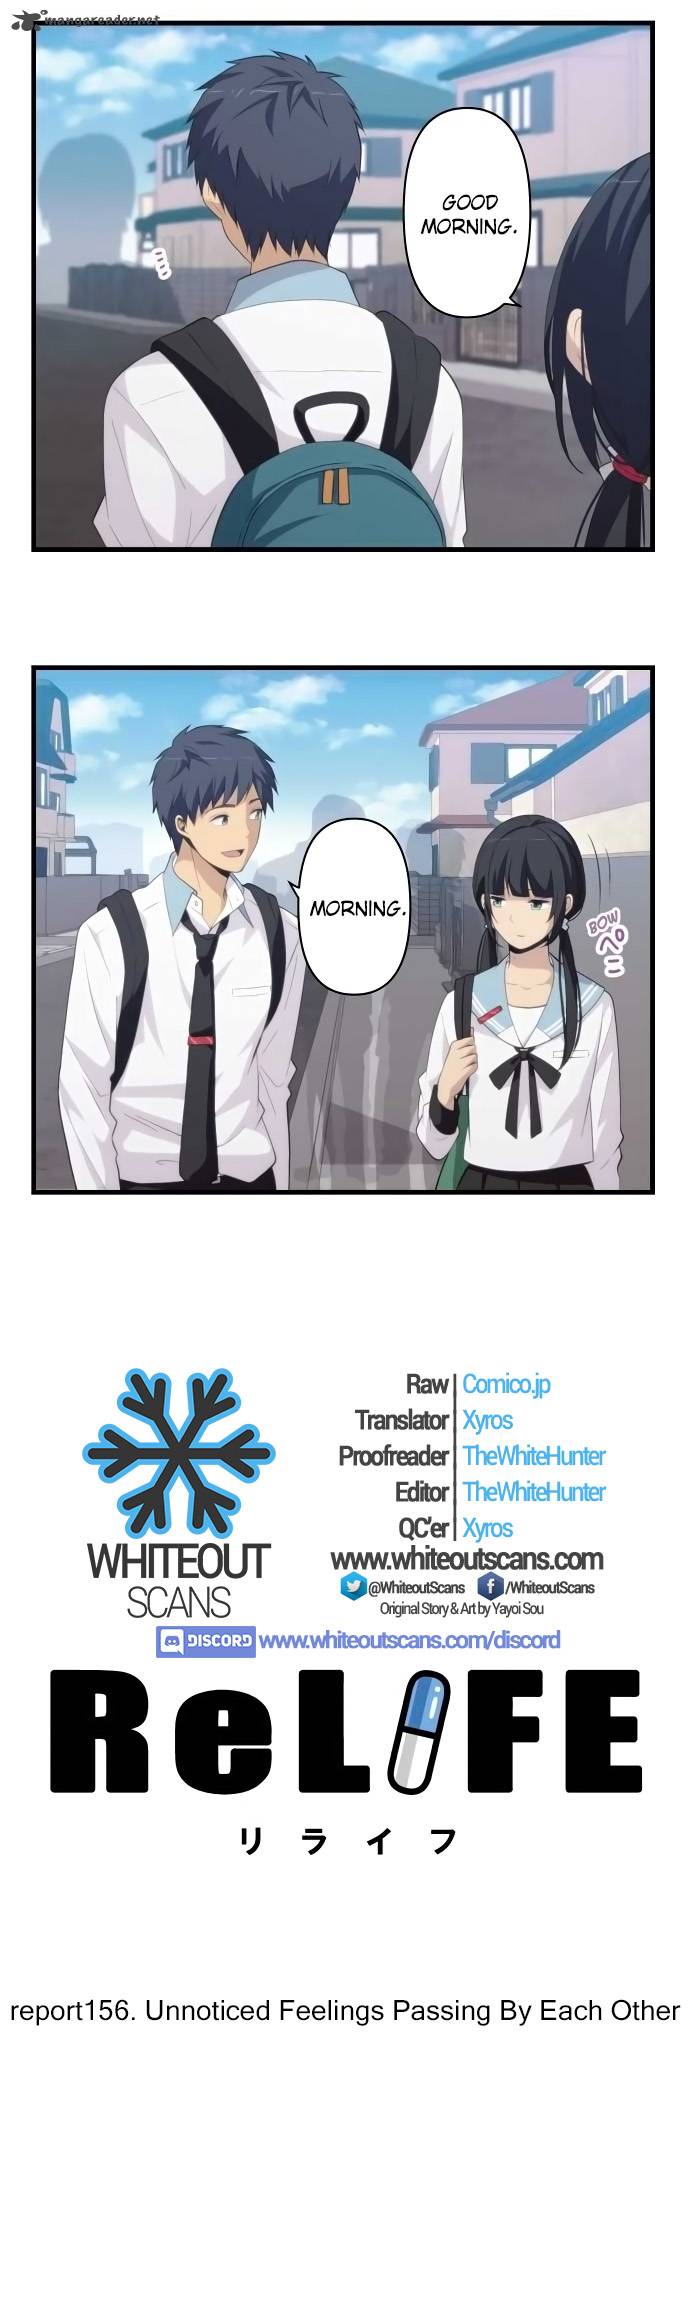 Relife Chapter 156 Page 2